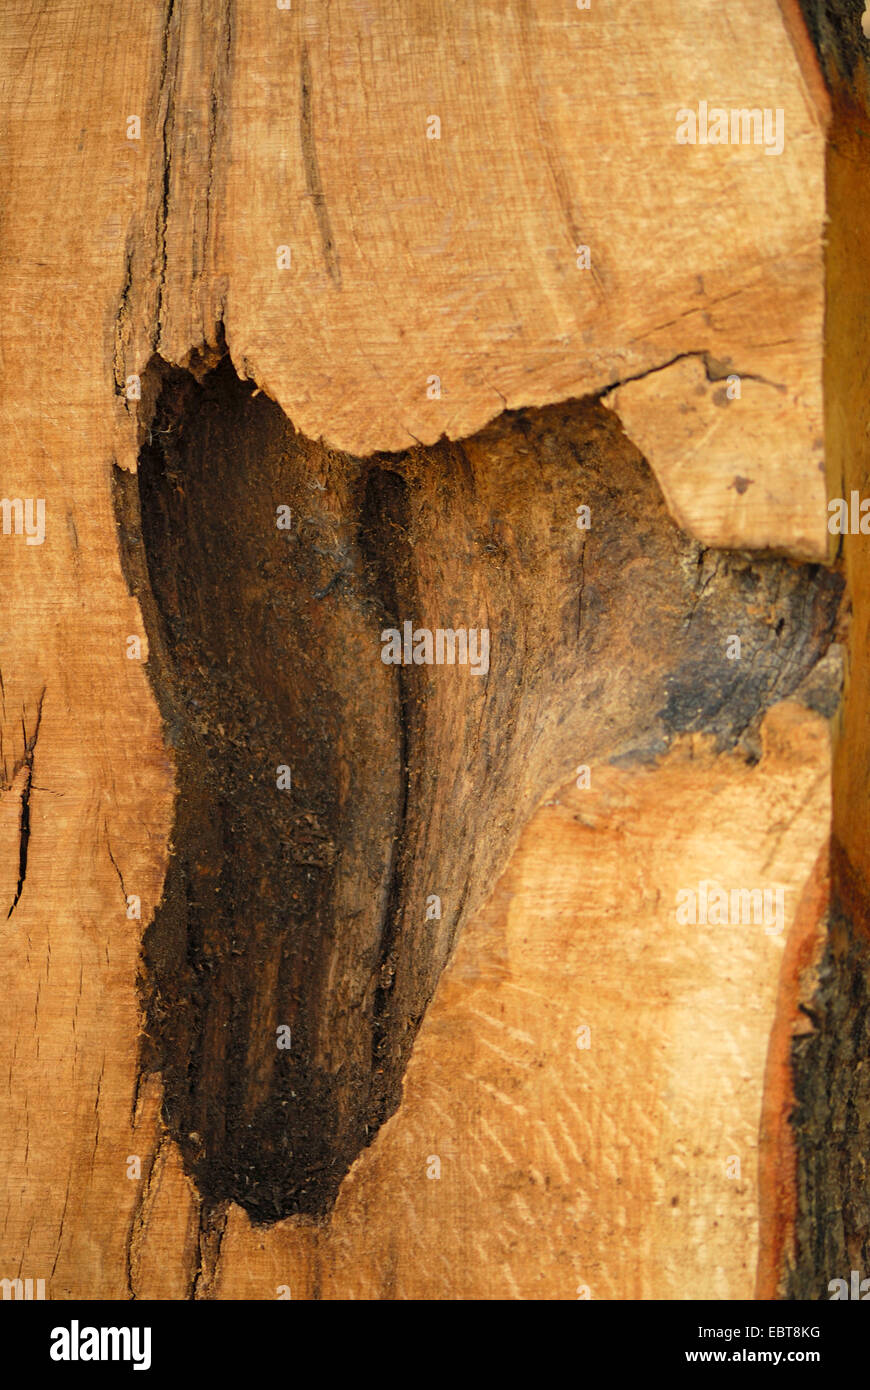 woodpeckers, wrynecks, piculets (Picidae), cross section of a tree trunk with woodpecker cavity, Germany Stock Photo